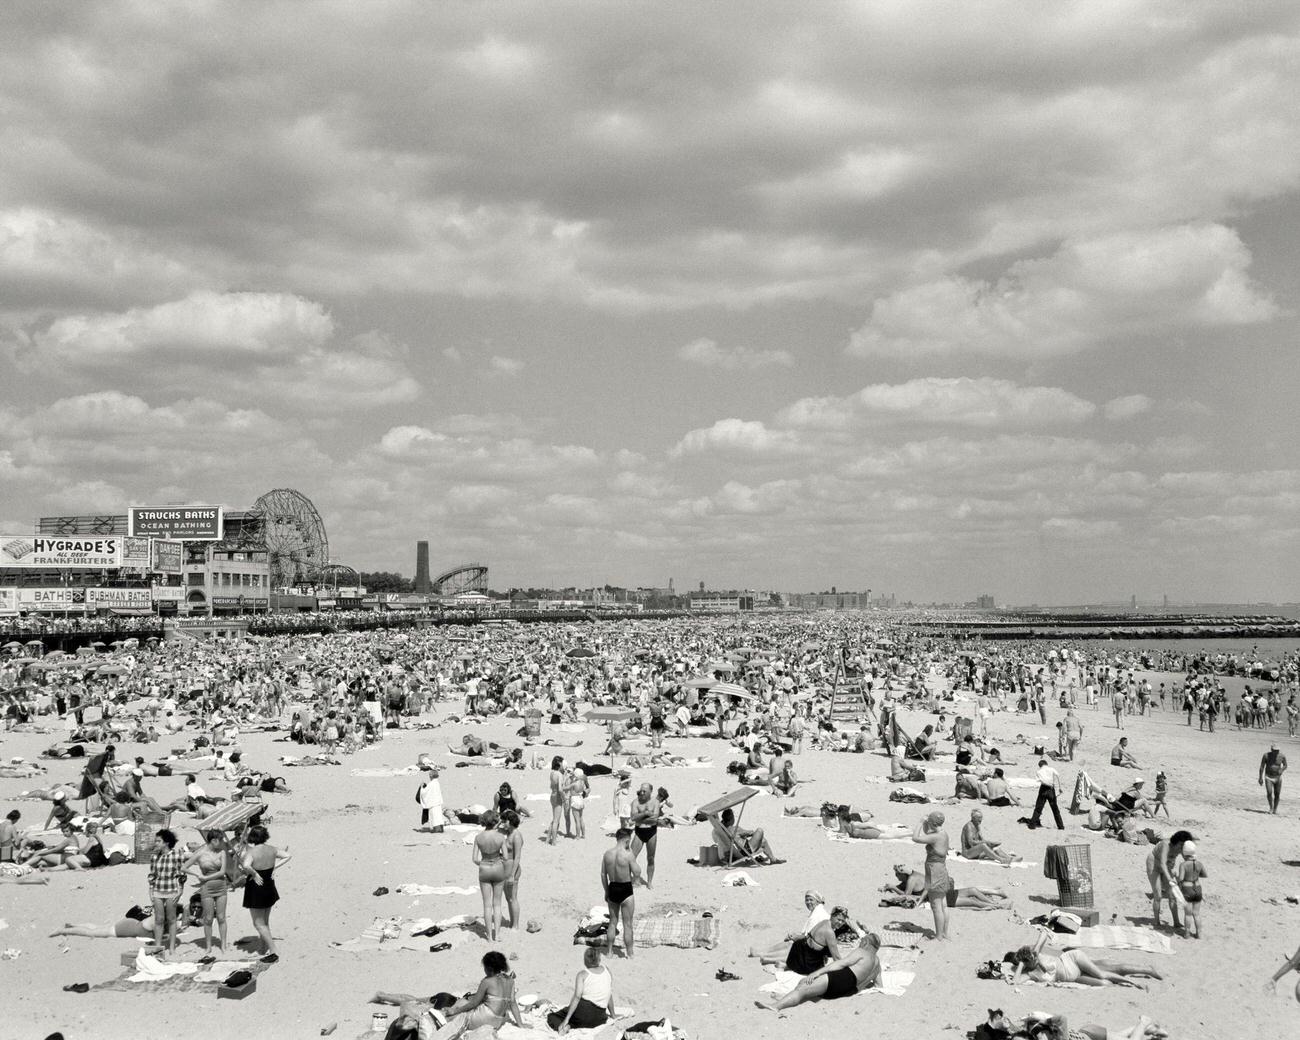 Crowded Beach With Amusement Park In Background